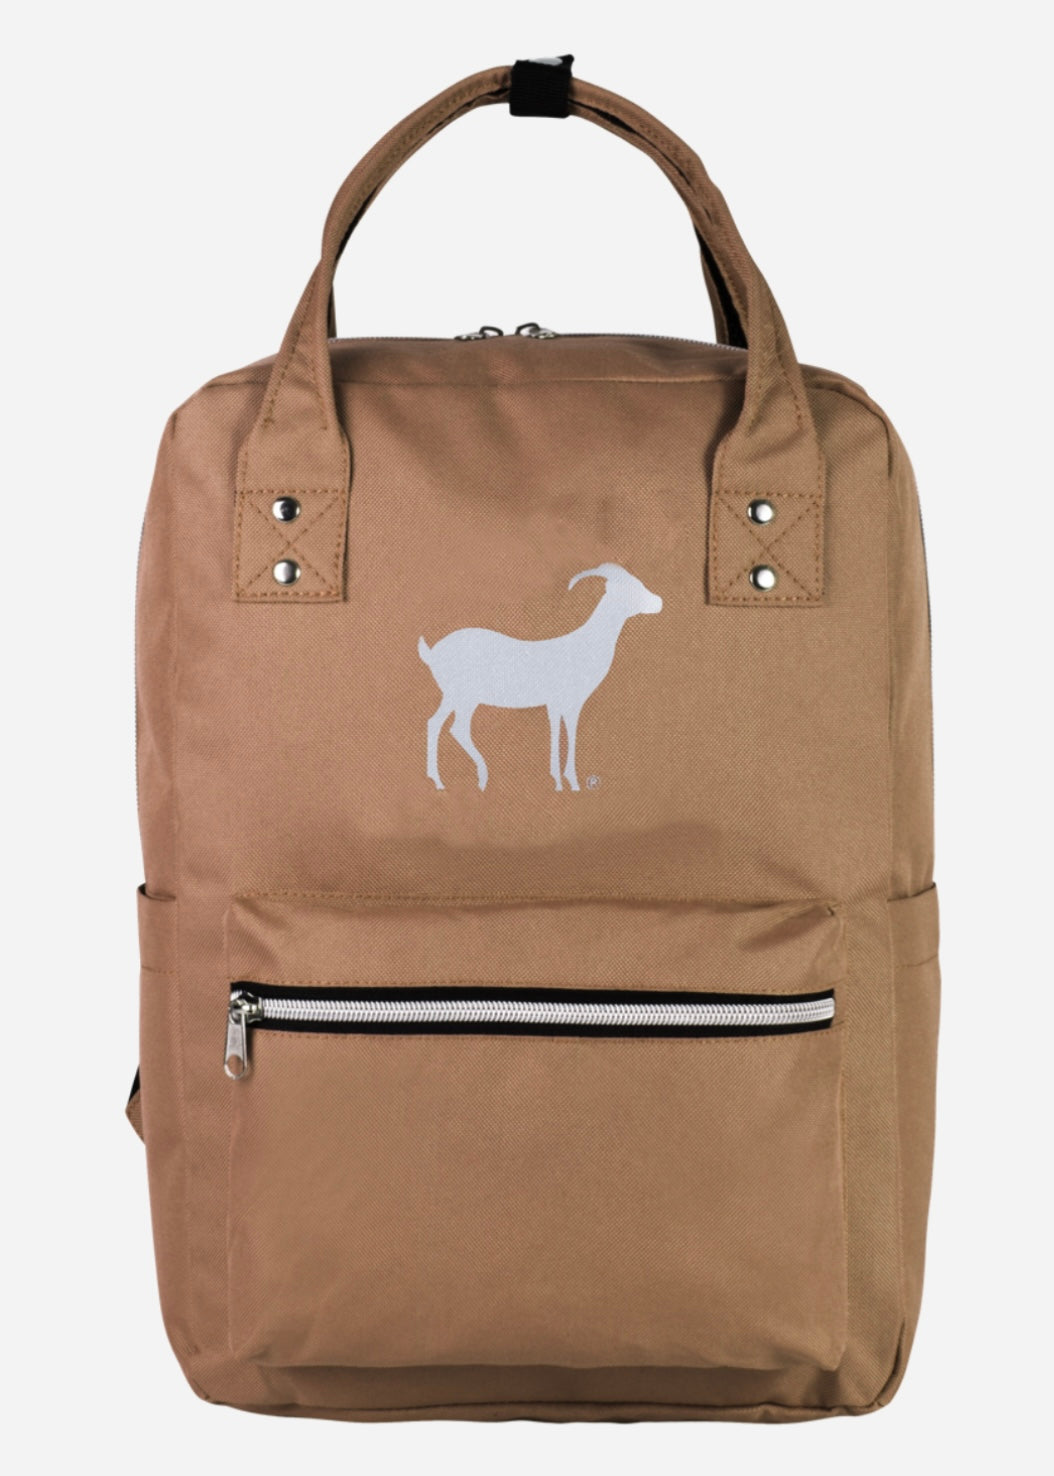 2-in-1 Backpack (Beige) THE MOTLEY GOAT